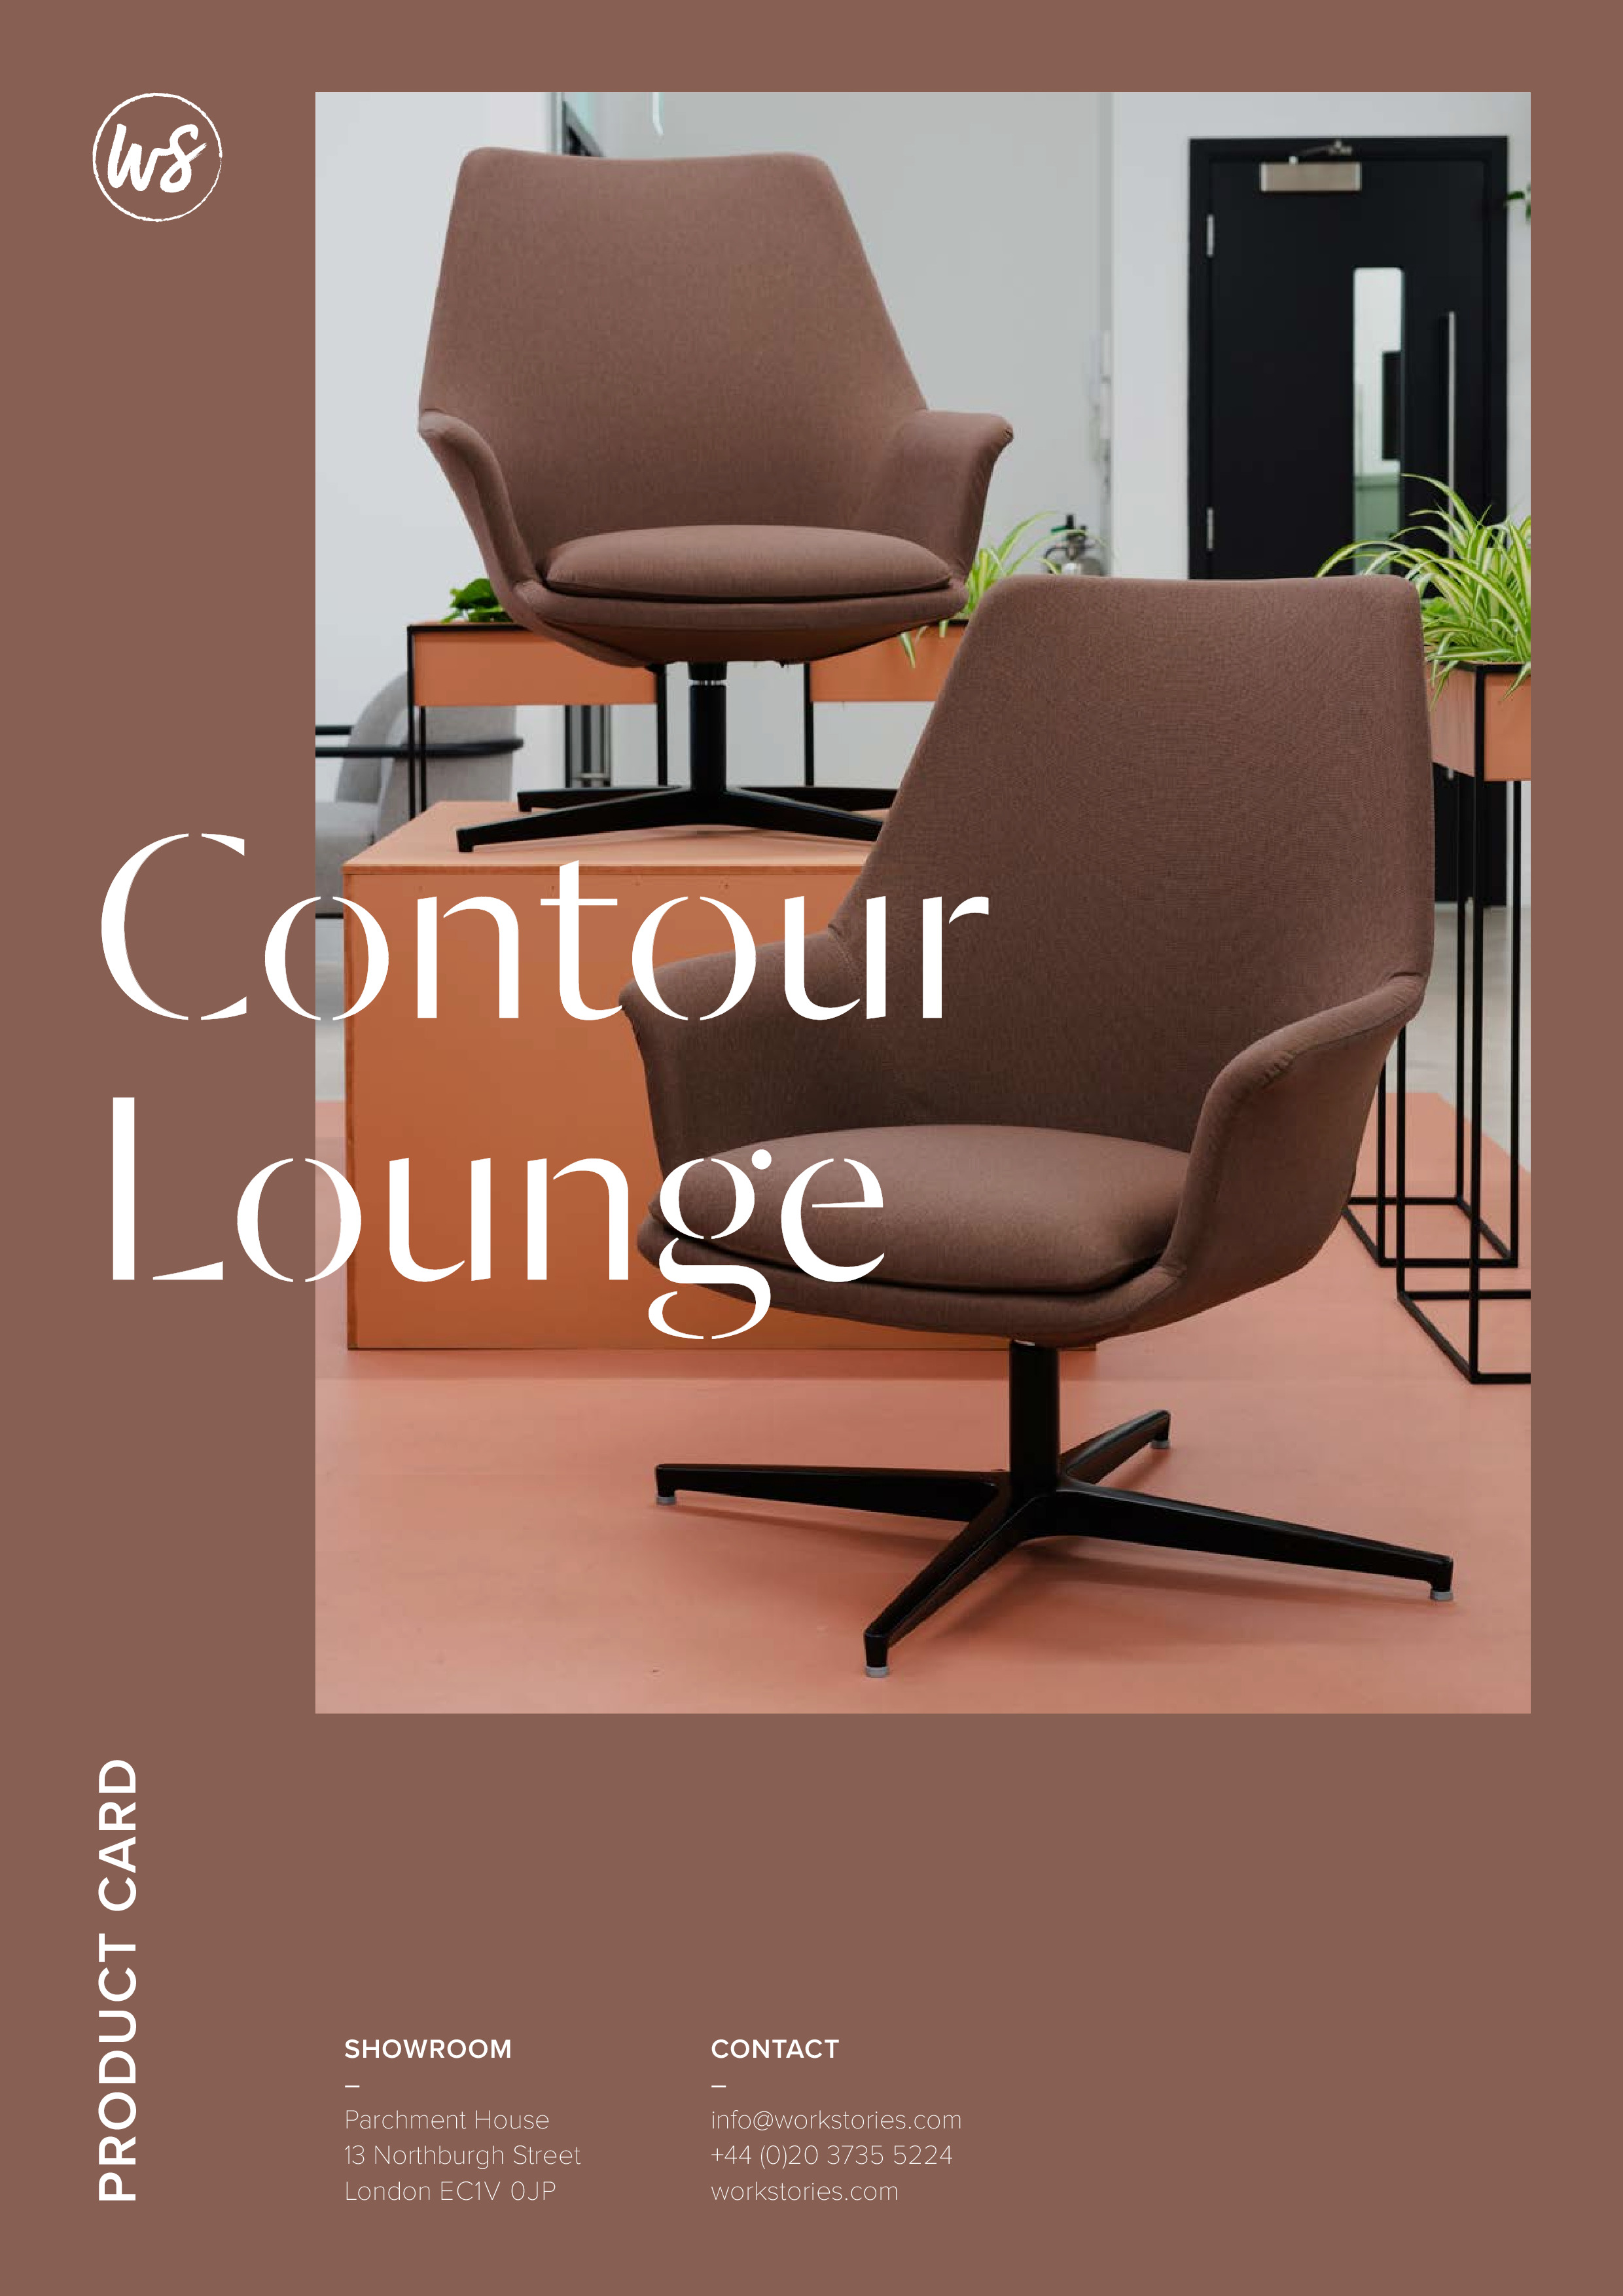 WS - Contour Lounge - Product card